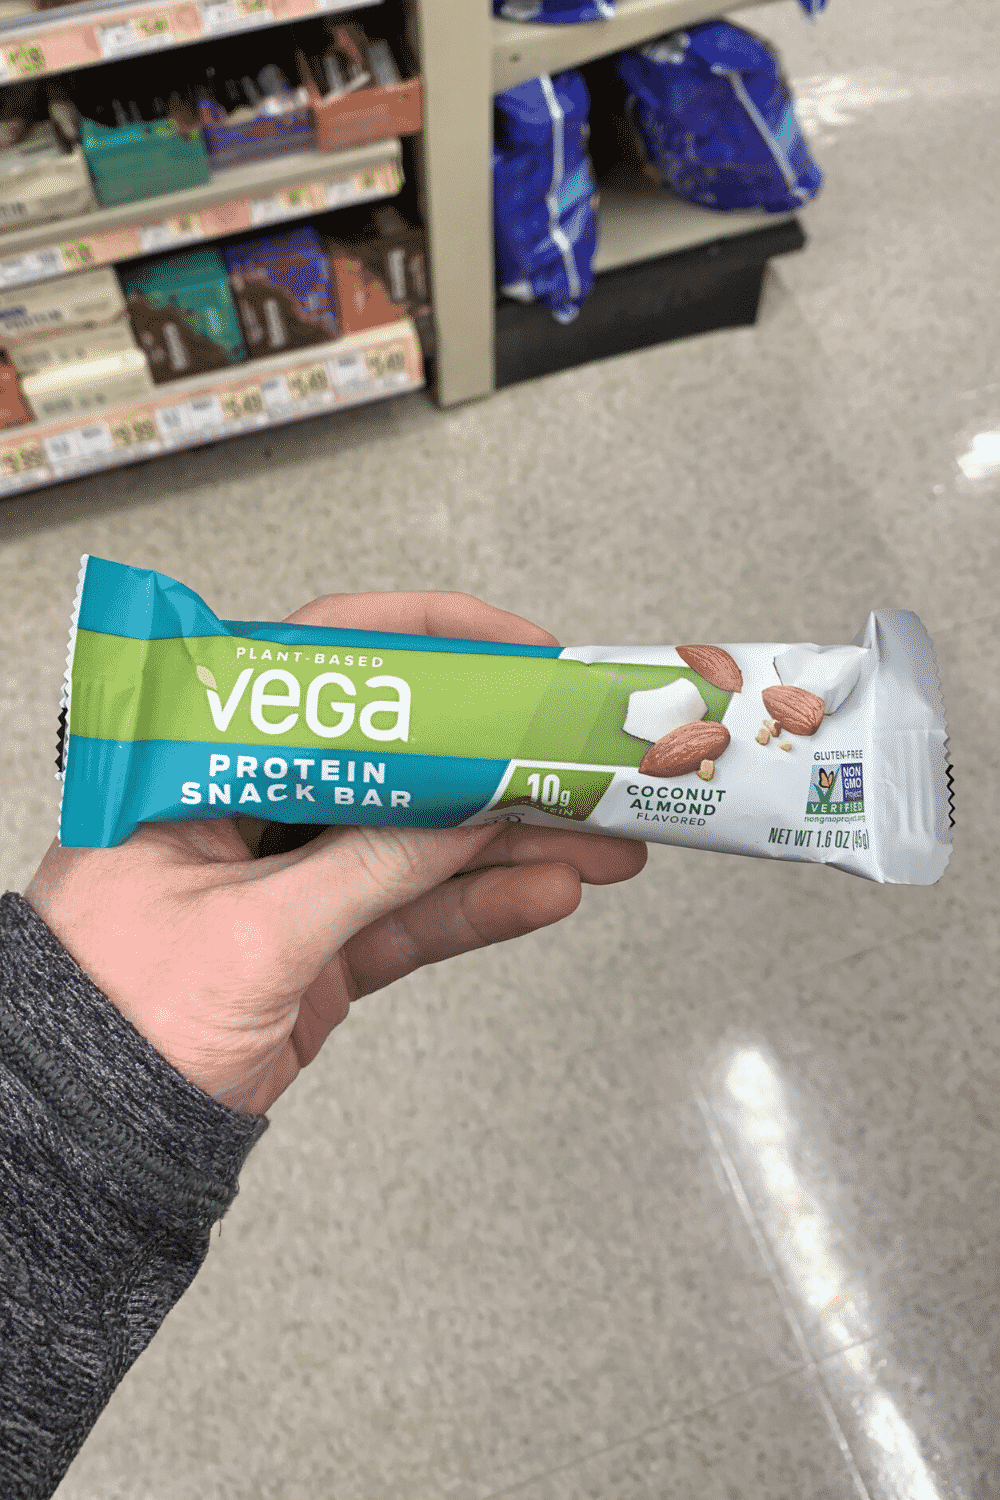 A hand holding a wrapped vega protein snack bar coconut almond flavored.